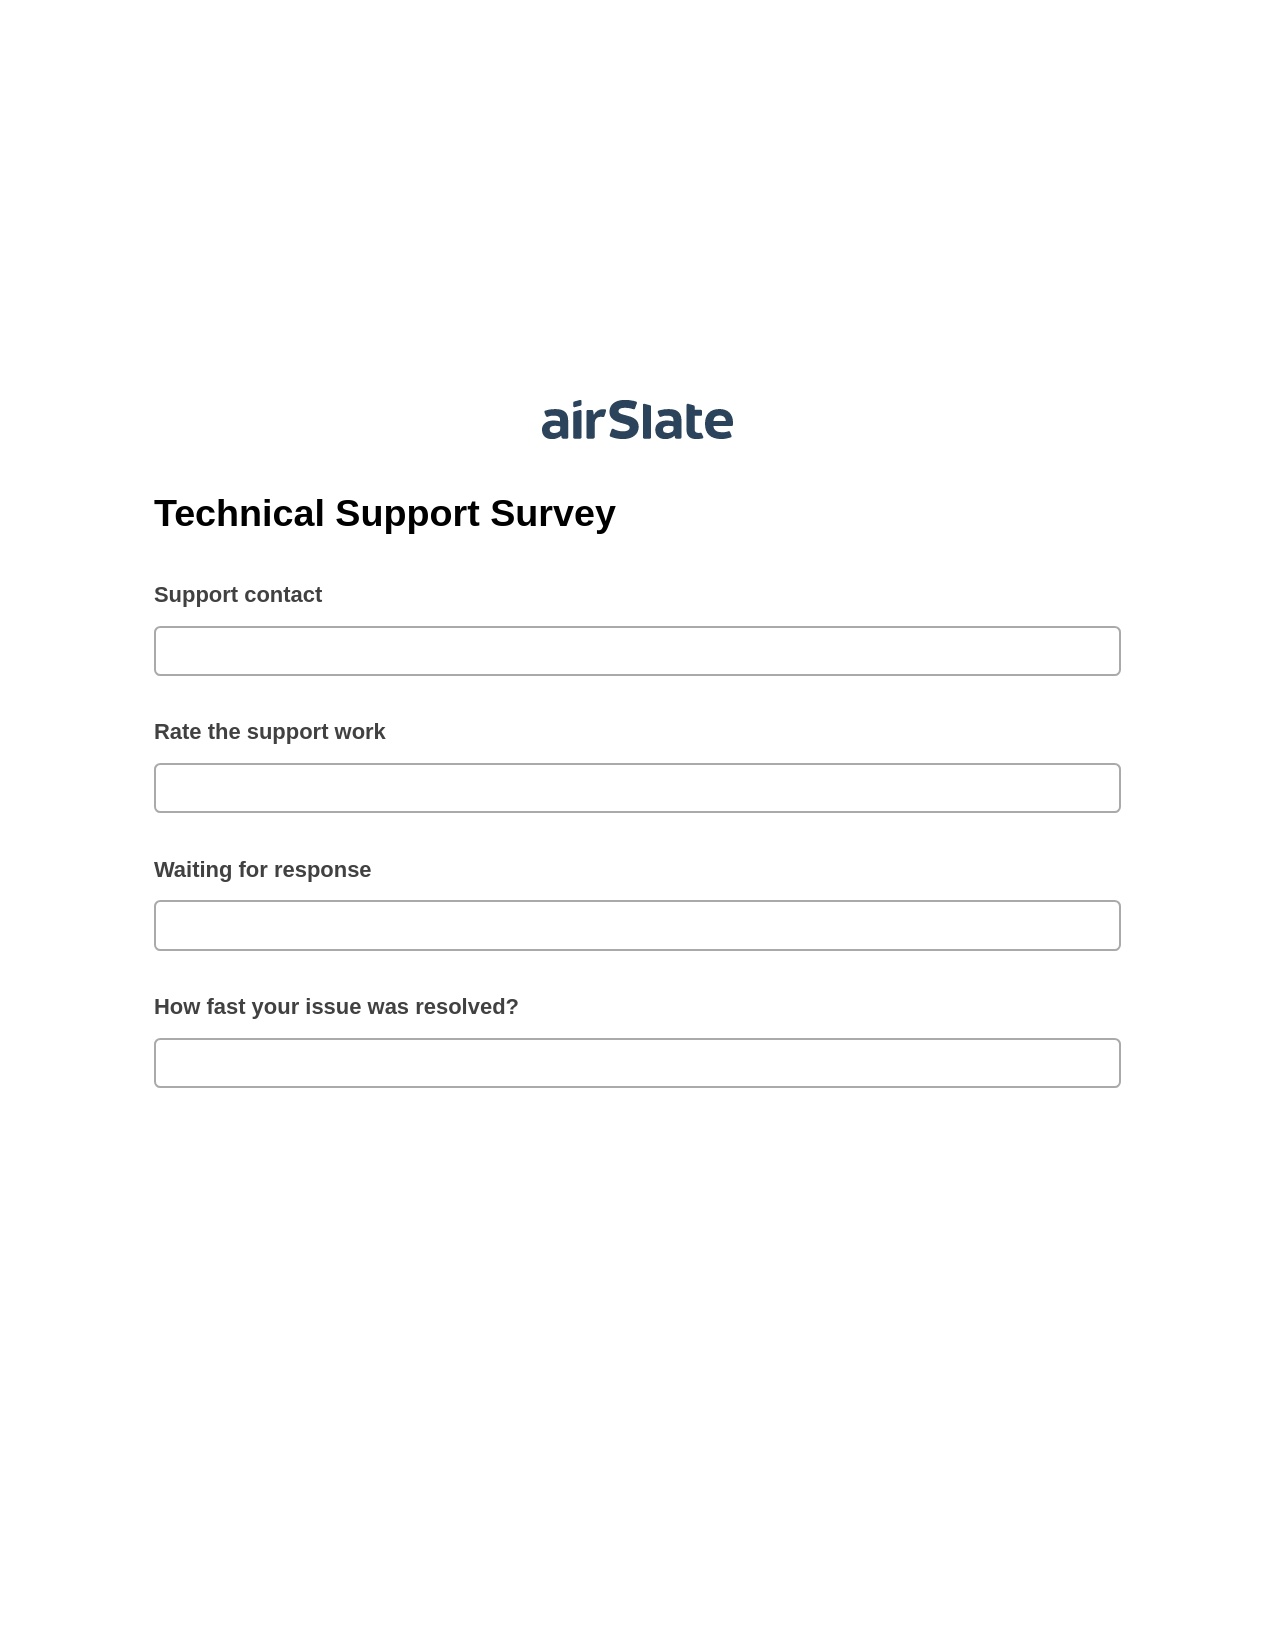 Technical Support Survey Pre-fill from Salesforce Records with SOQL Bot, Send a Slate to MS Dynamics 365 Contact Bot, Export to NetSuite Bot